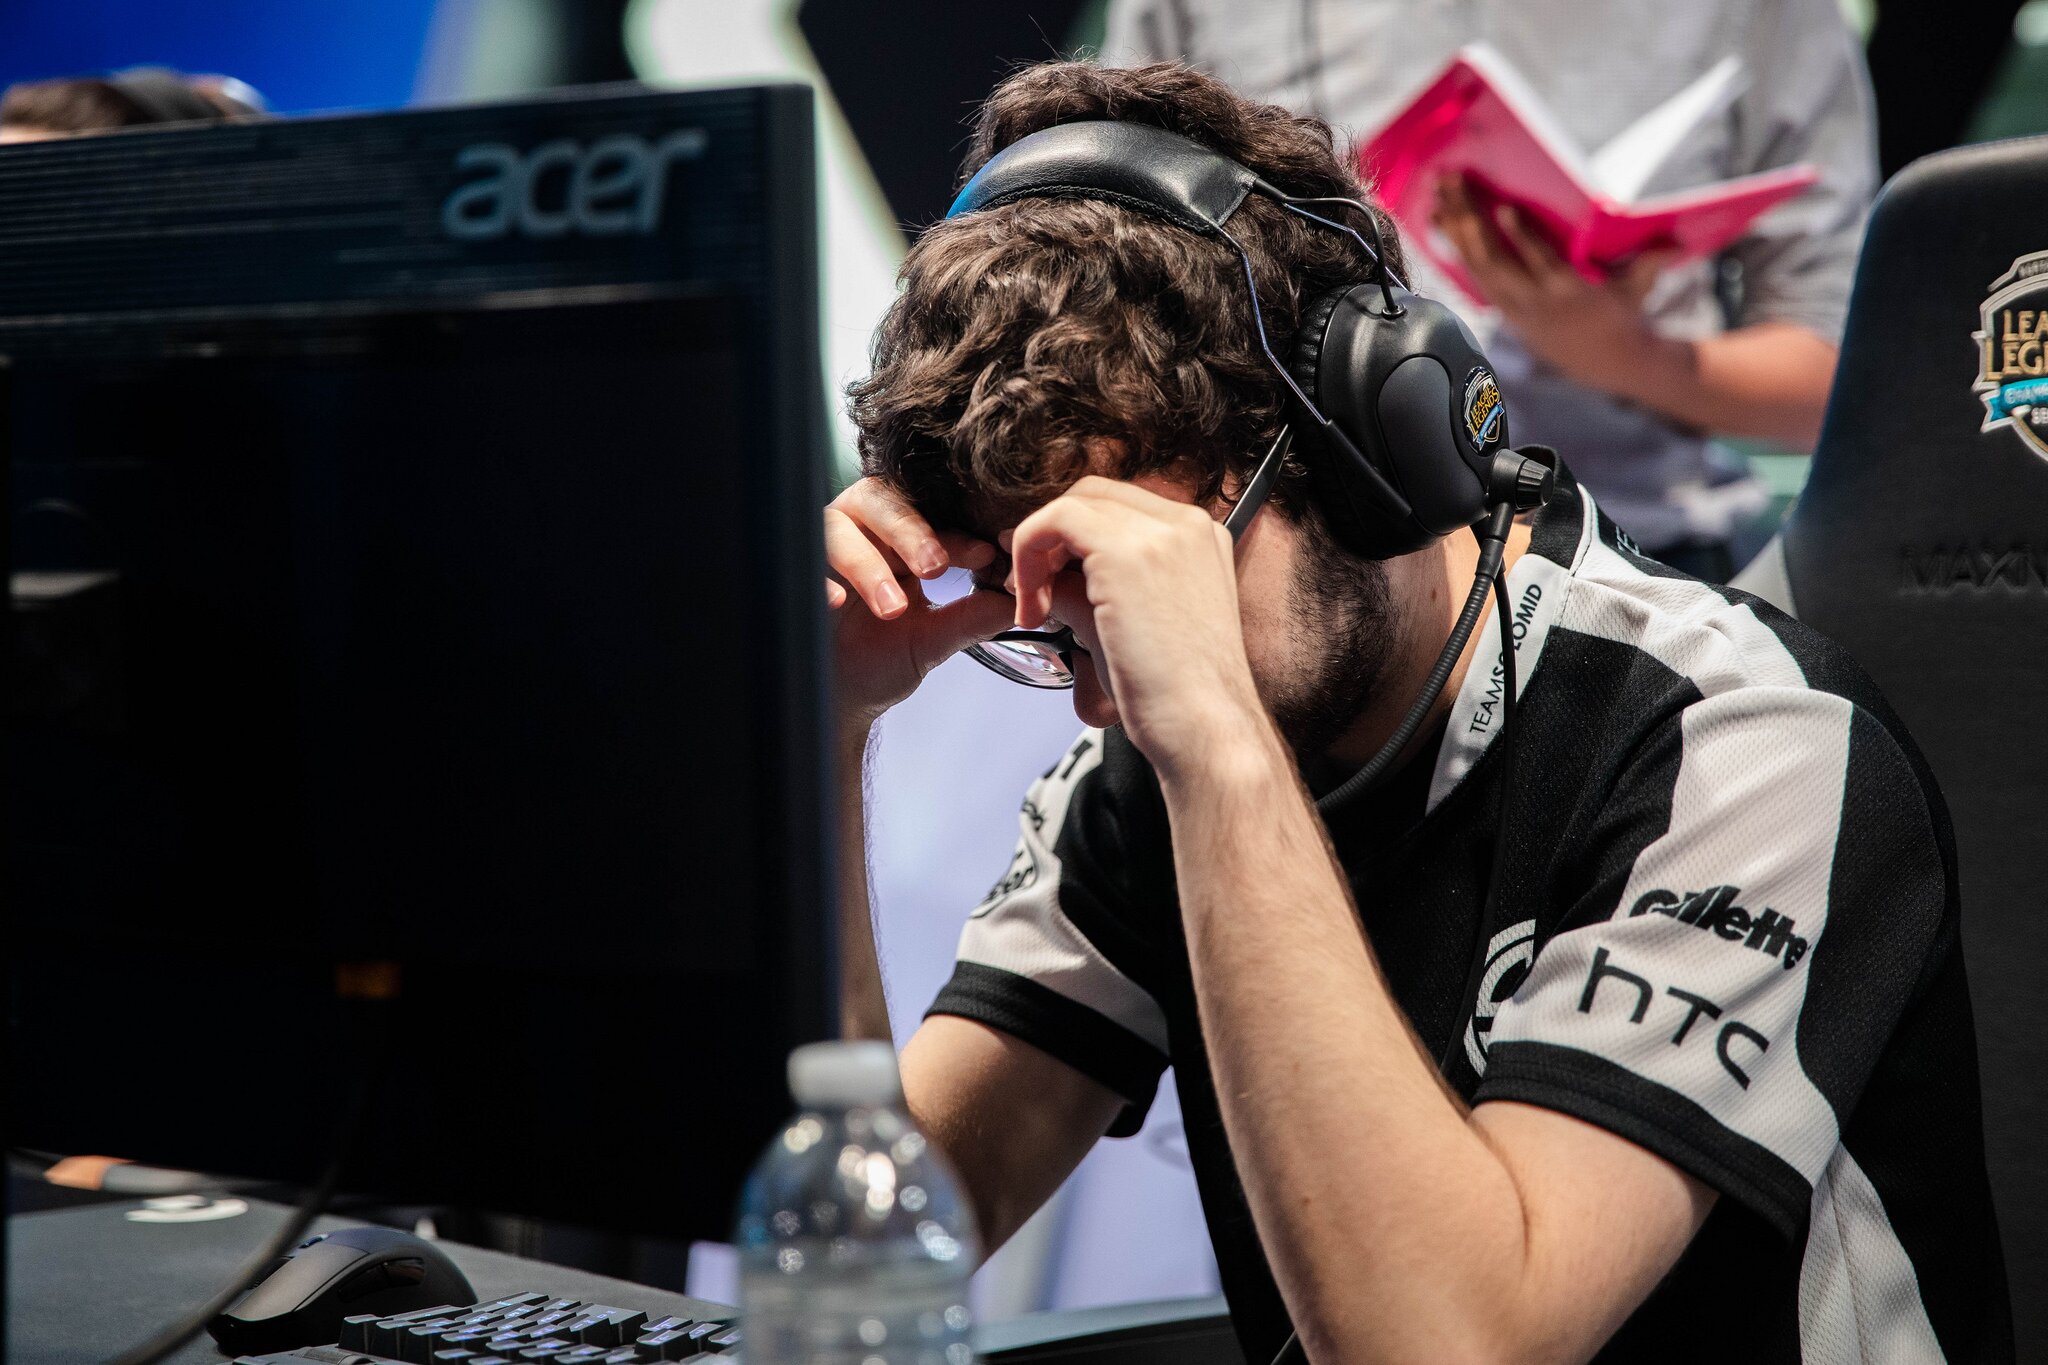 After an embarrassing showing in the NA Regional Finals, TSM failed to qualify for the World Championships (Photo courtesy of Riot Games).